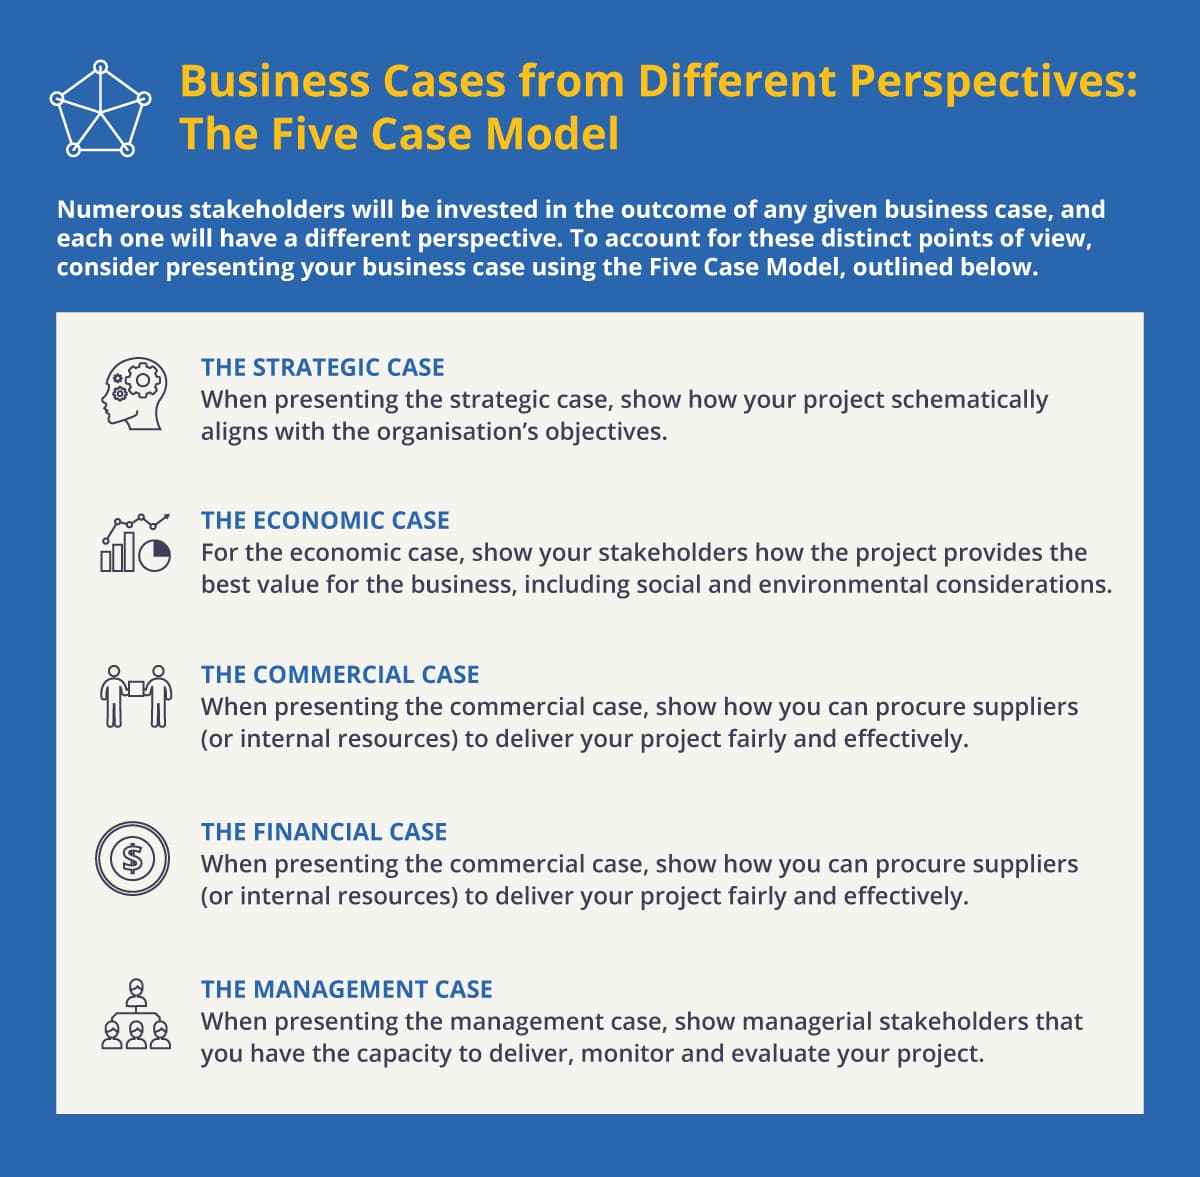 Business Cases from Different Perspectives: The Five Case Model